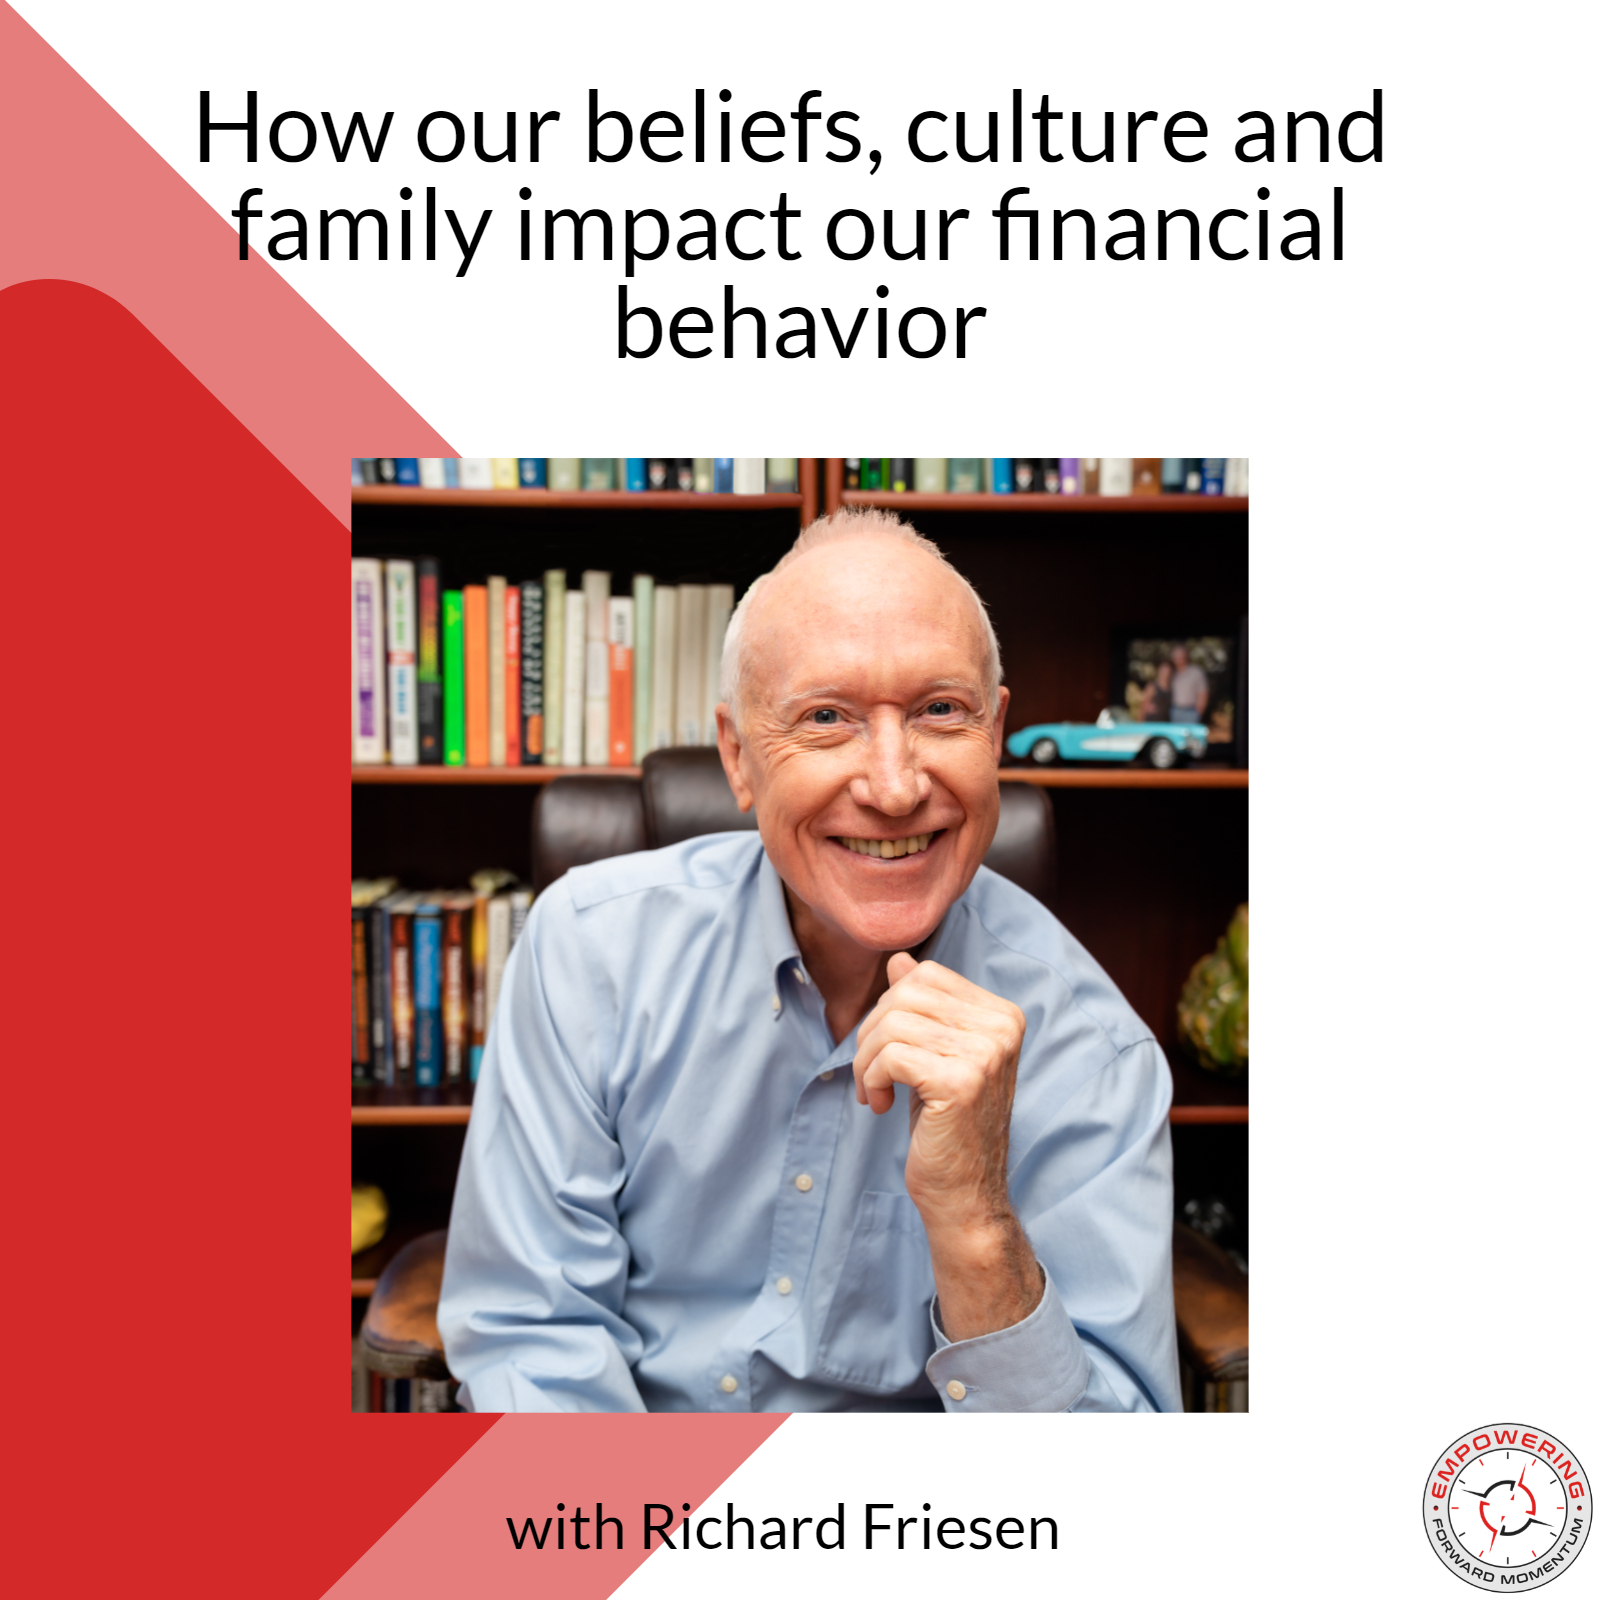 How our beliefs culture and family impact our financial behavior - with Richard Friesen